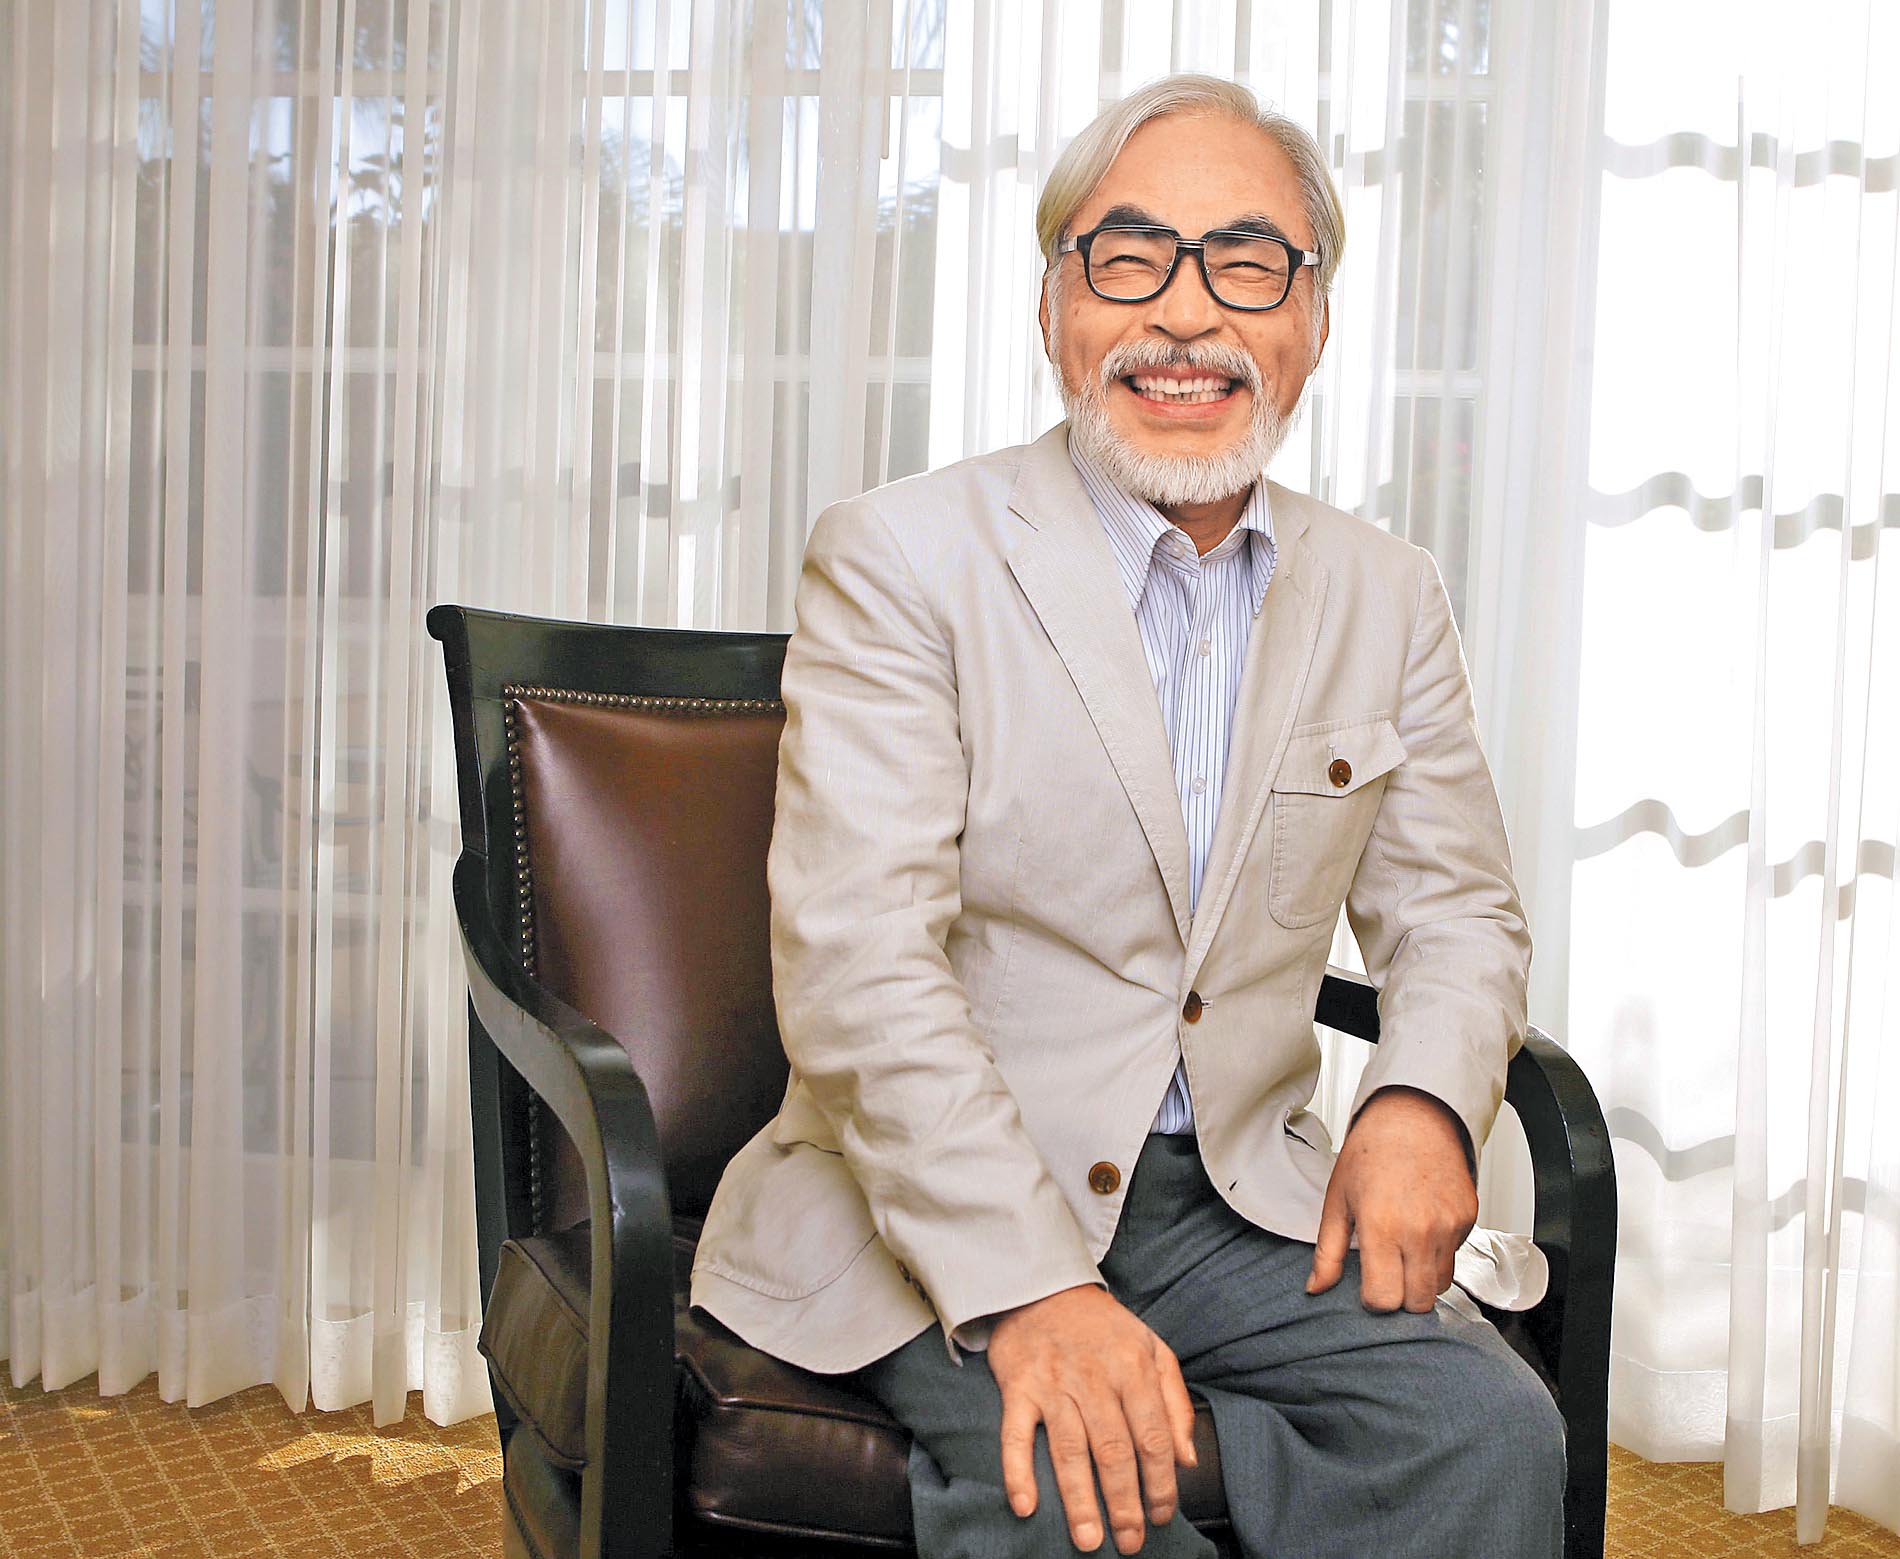 Japanese director Miyazaki of the animated movie "Ponyo" smiles as he poses for a picture in Los Angeles